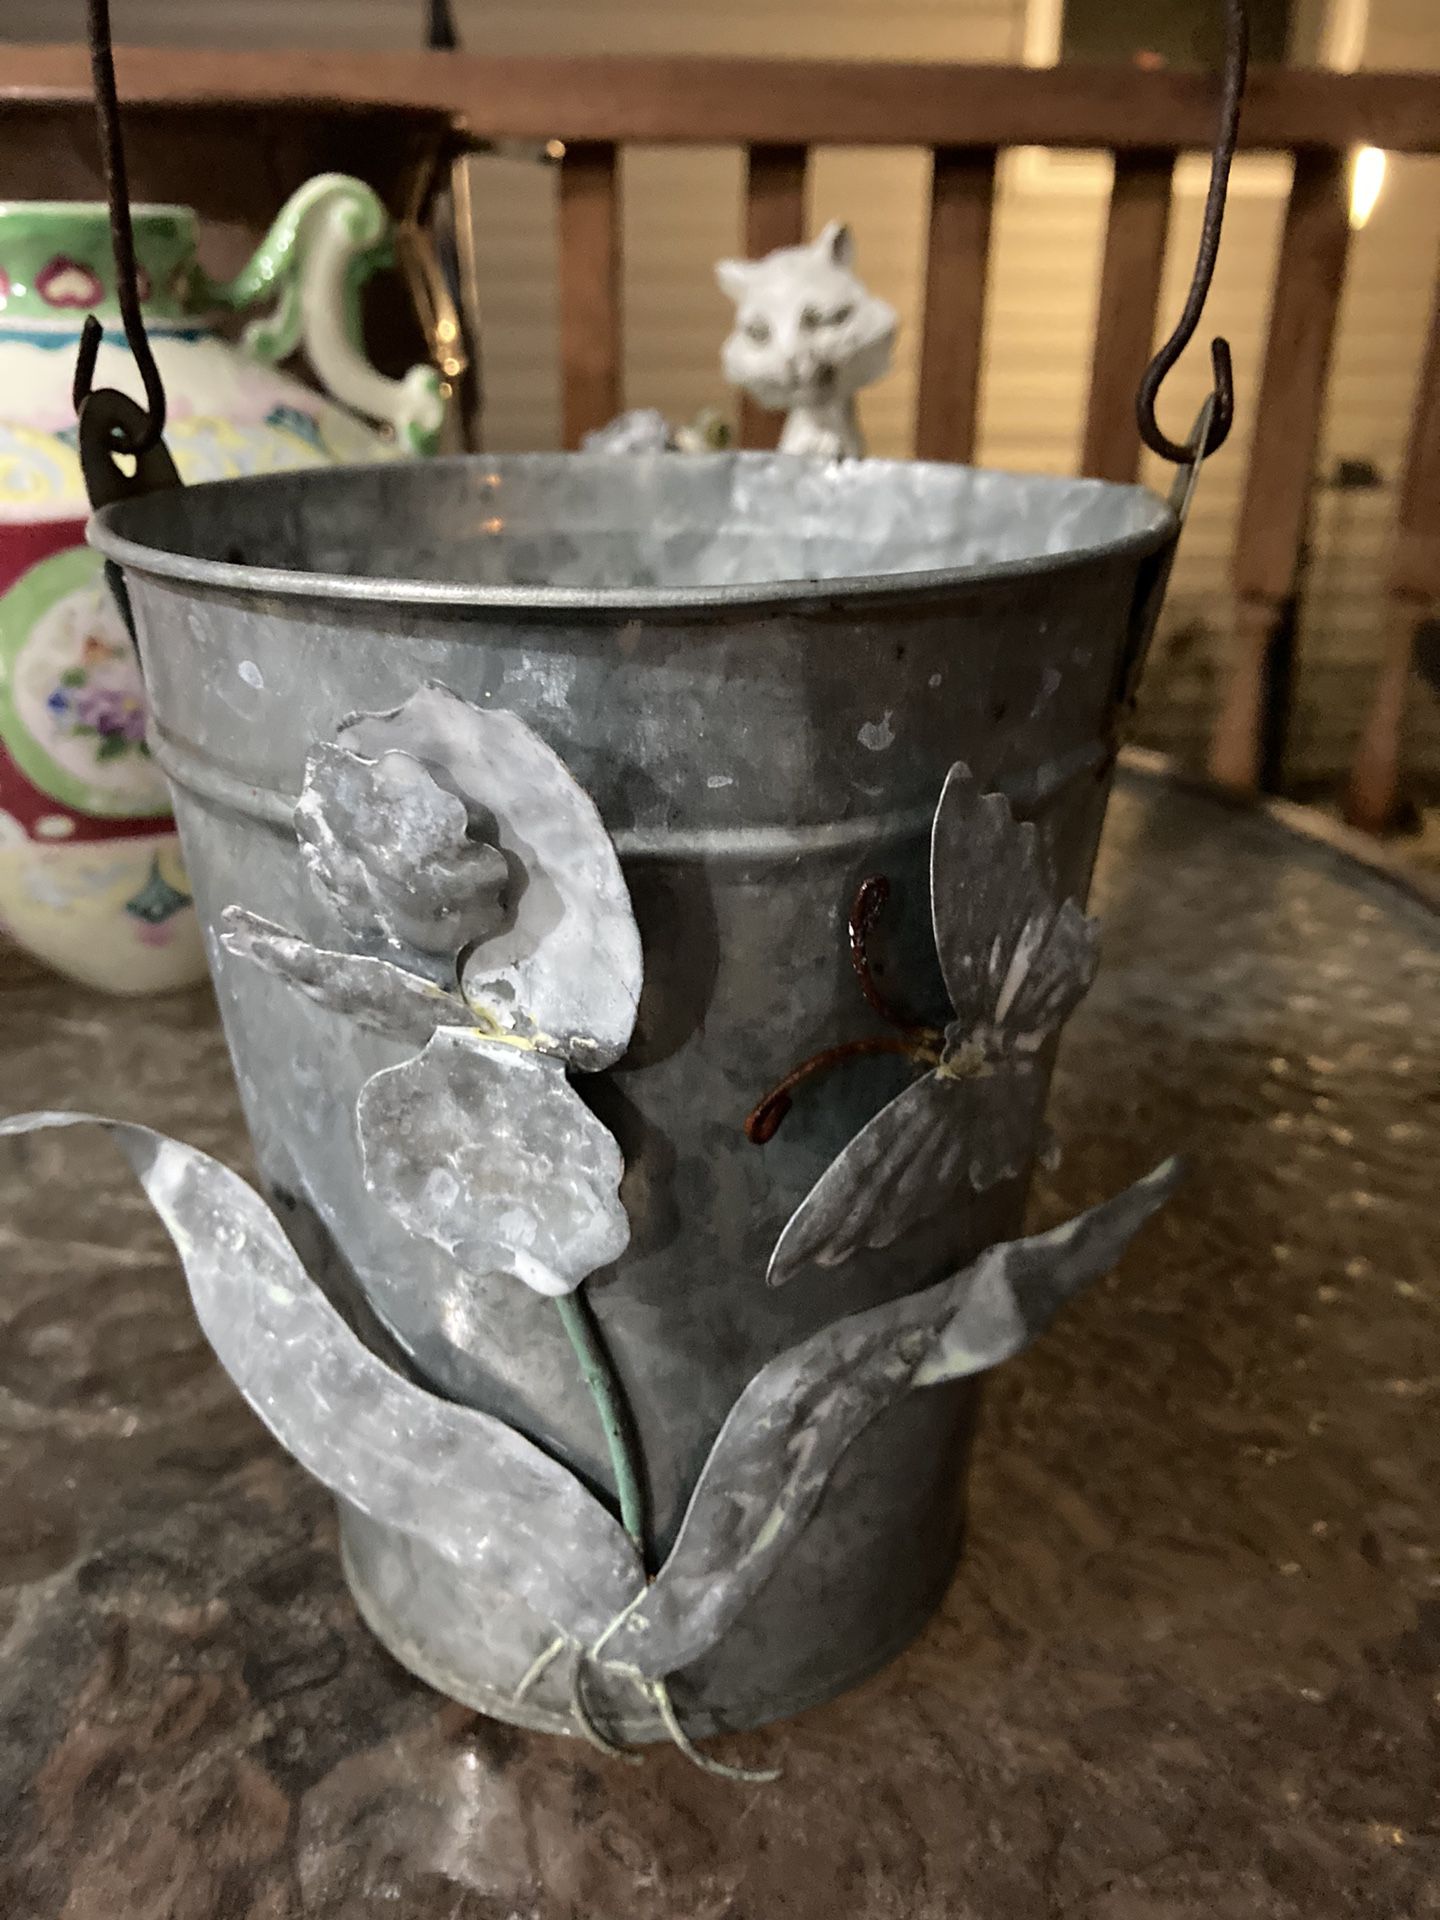 Small Vintage Decorative Galvanized Pail. Would be cute with a plant in it.